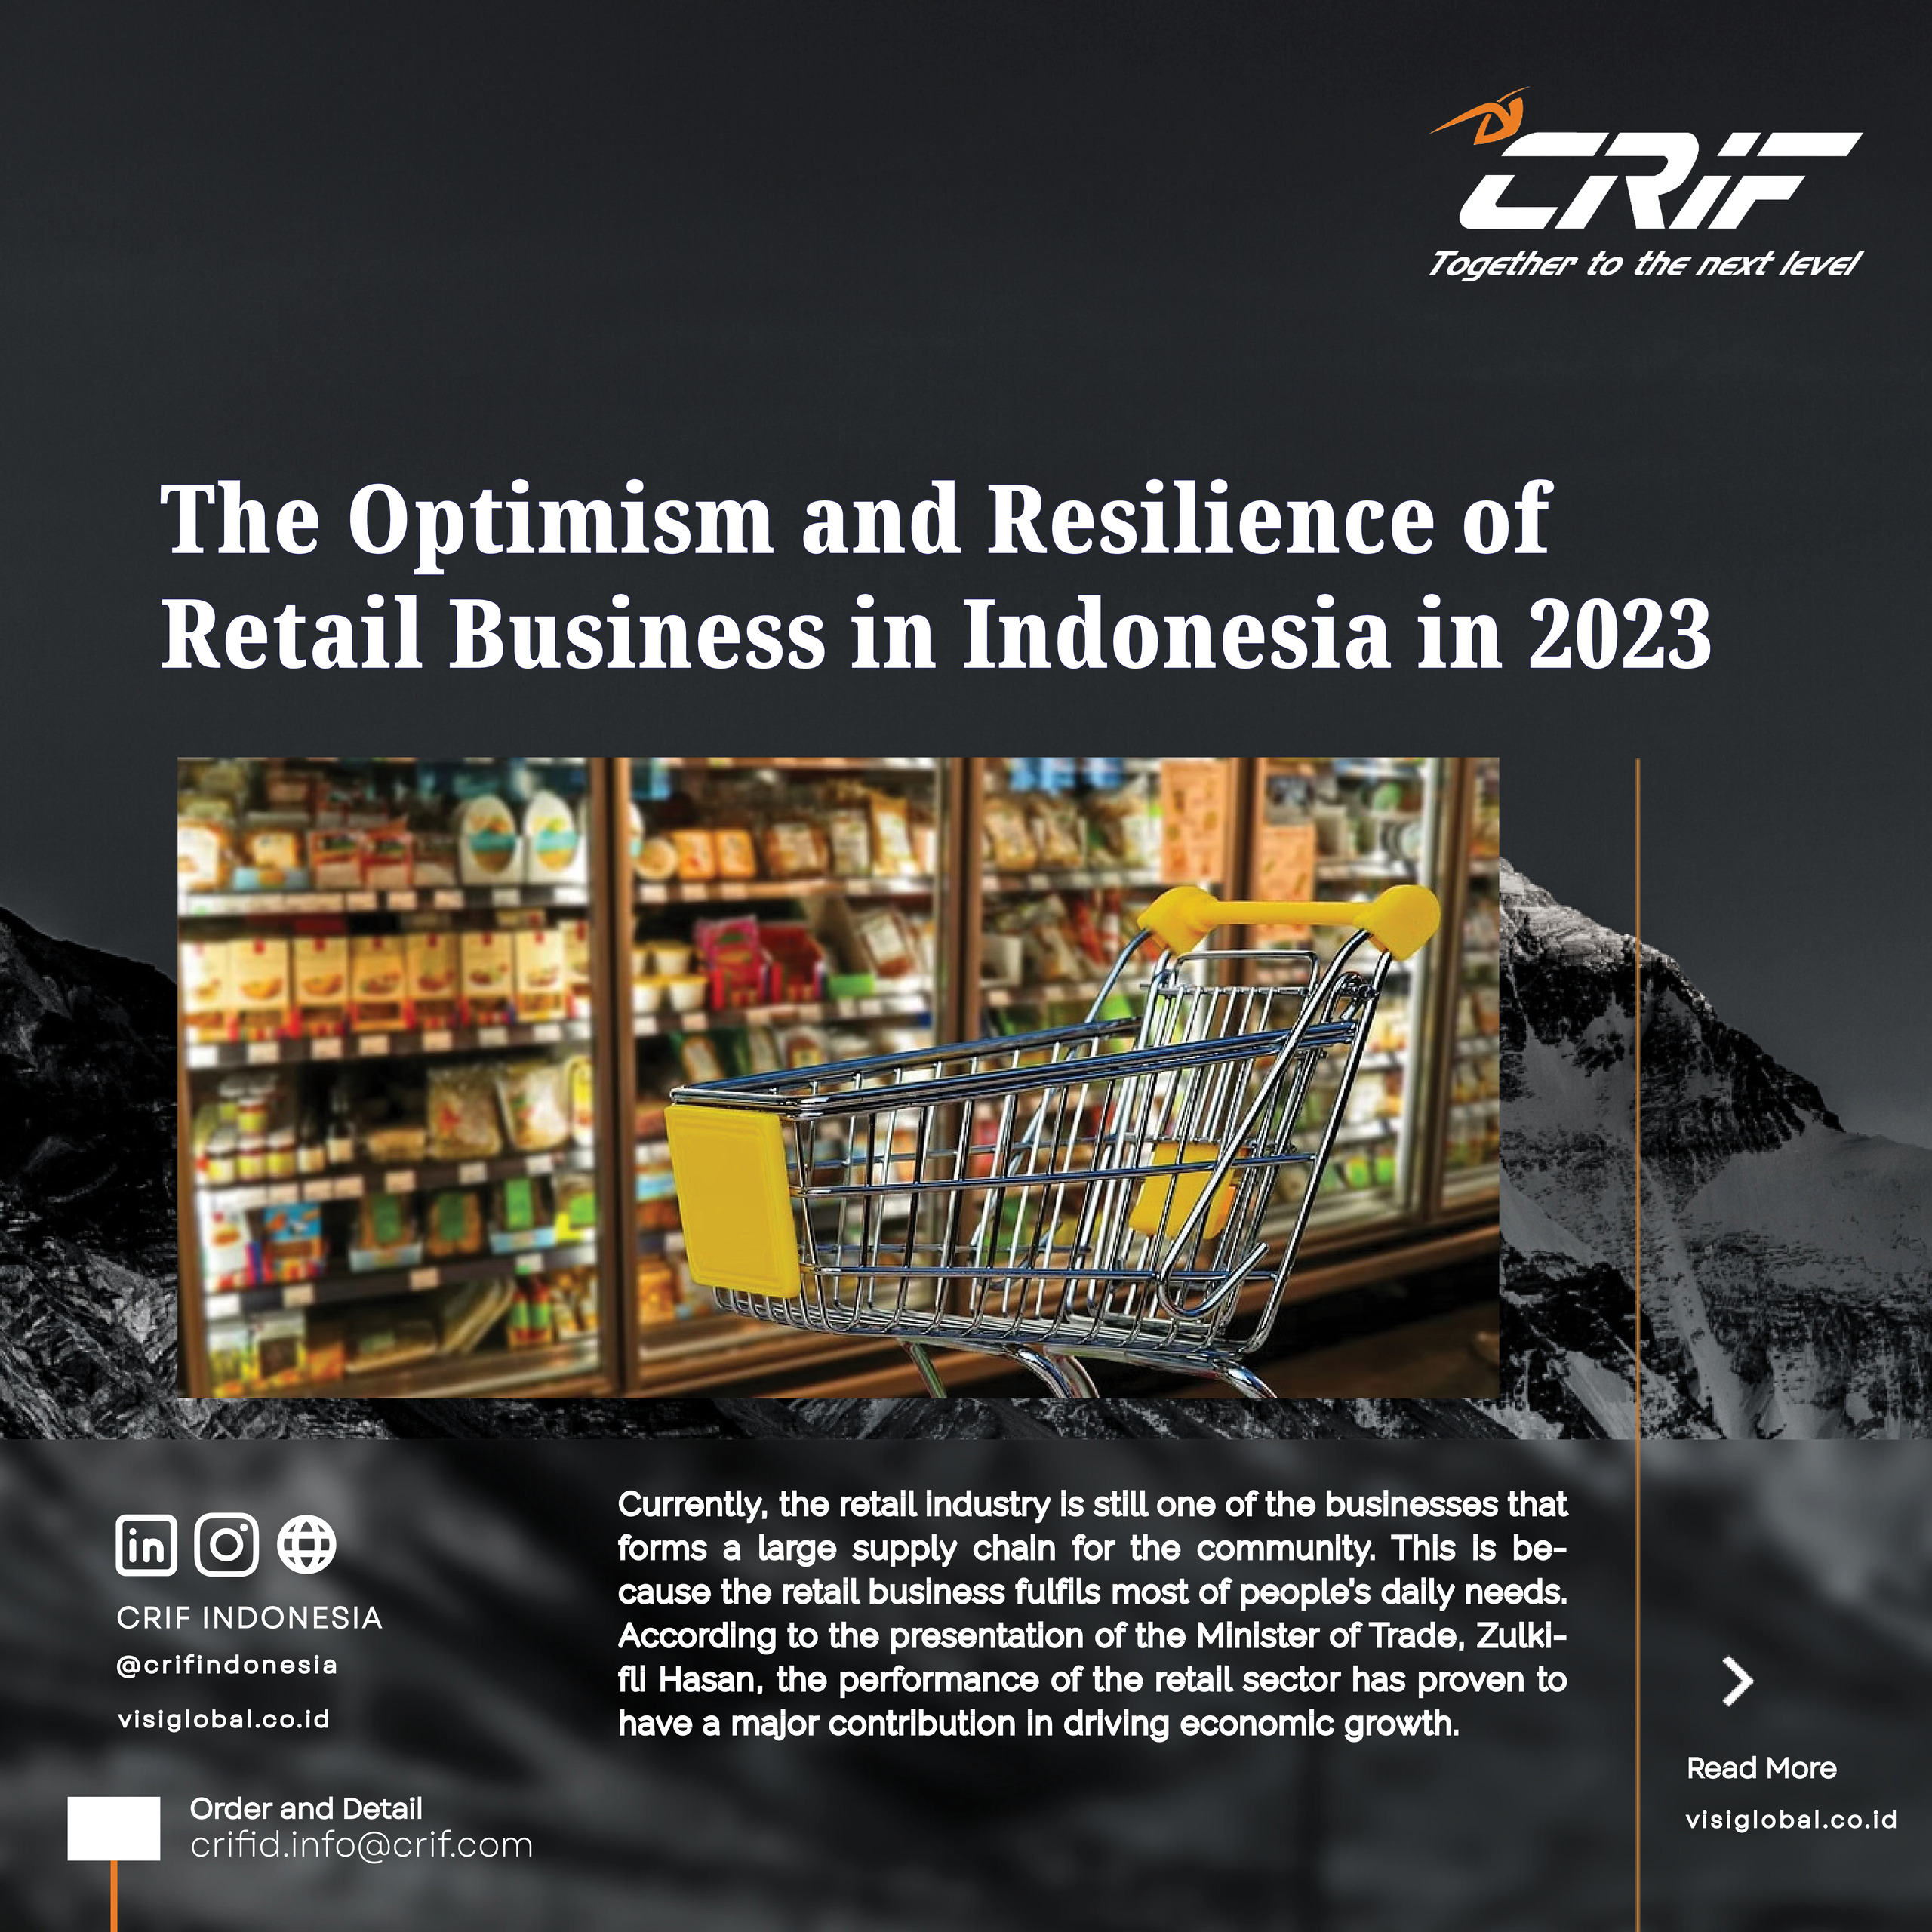 The Optimism and Resilience of Retail Business in Indonesia in 2023